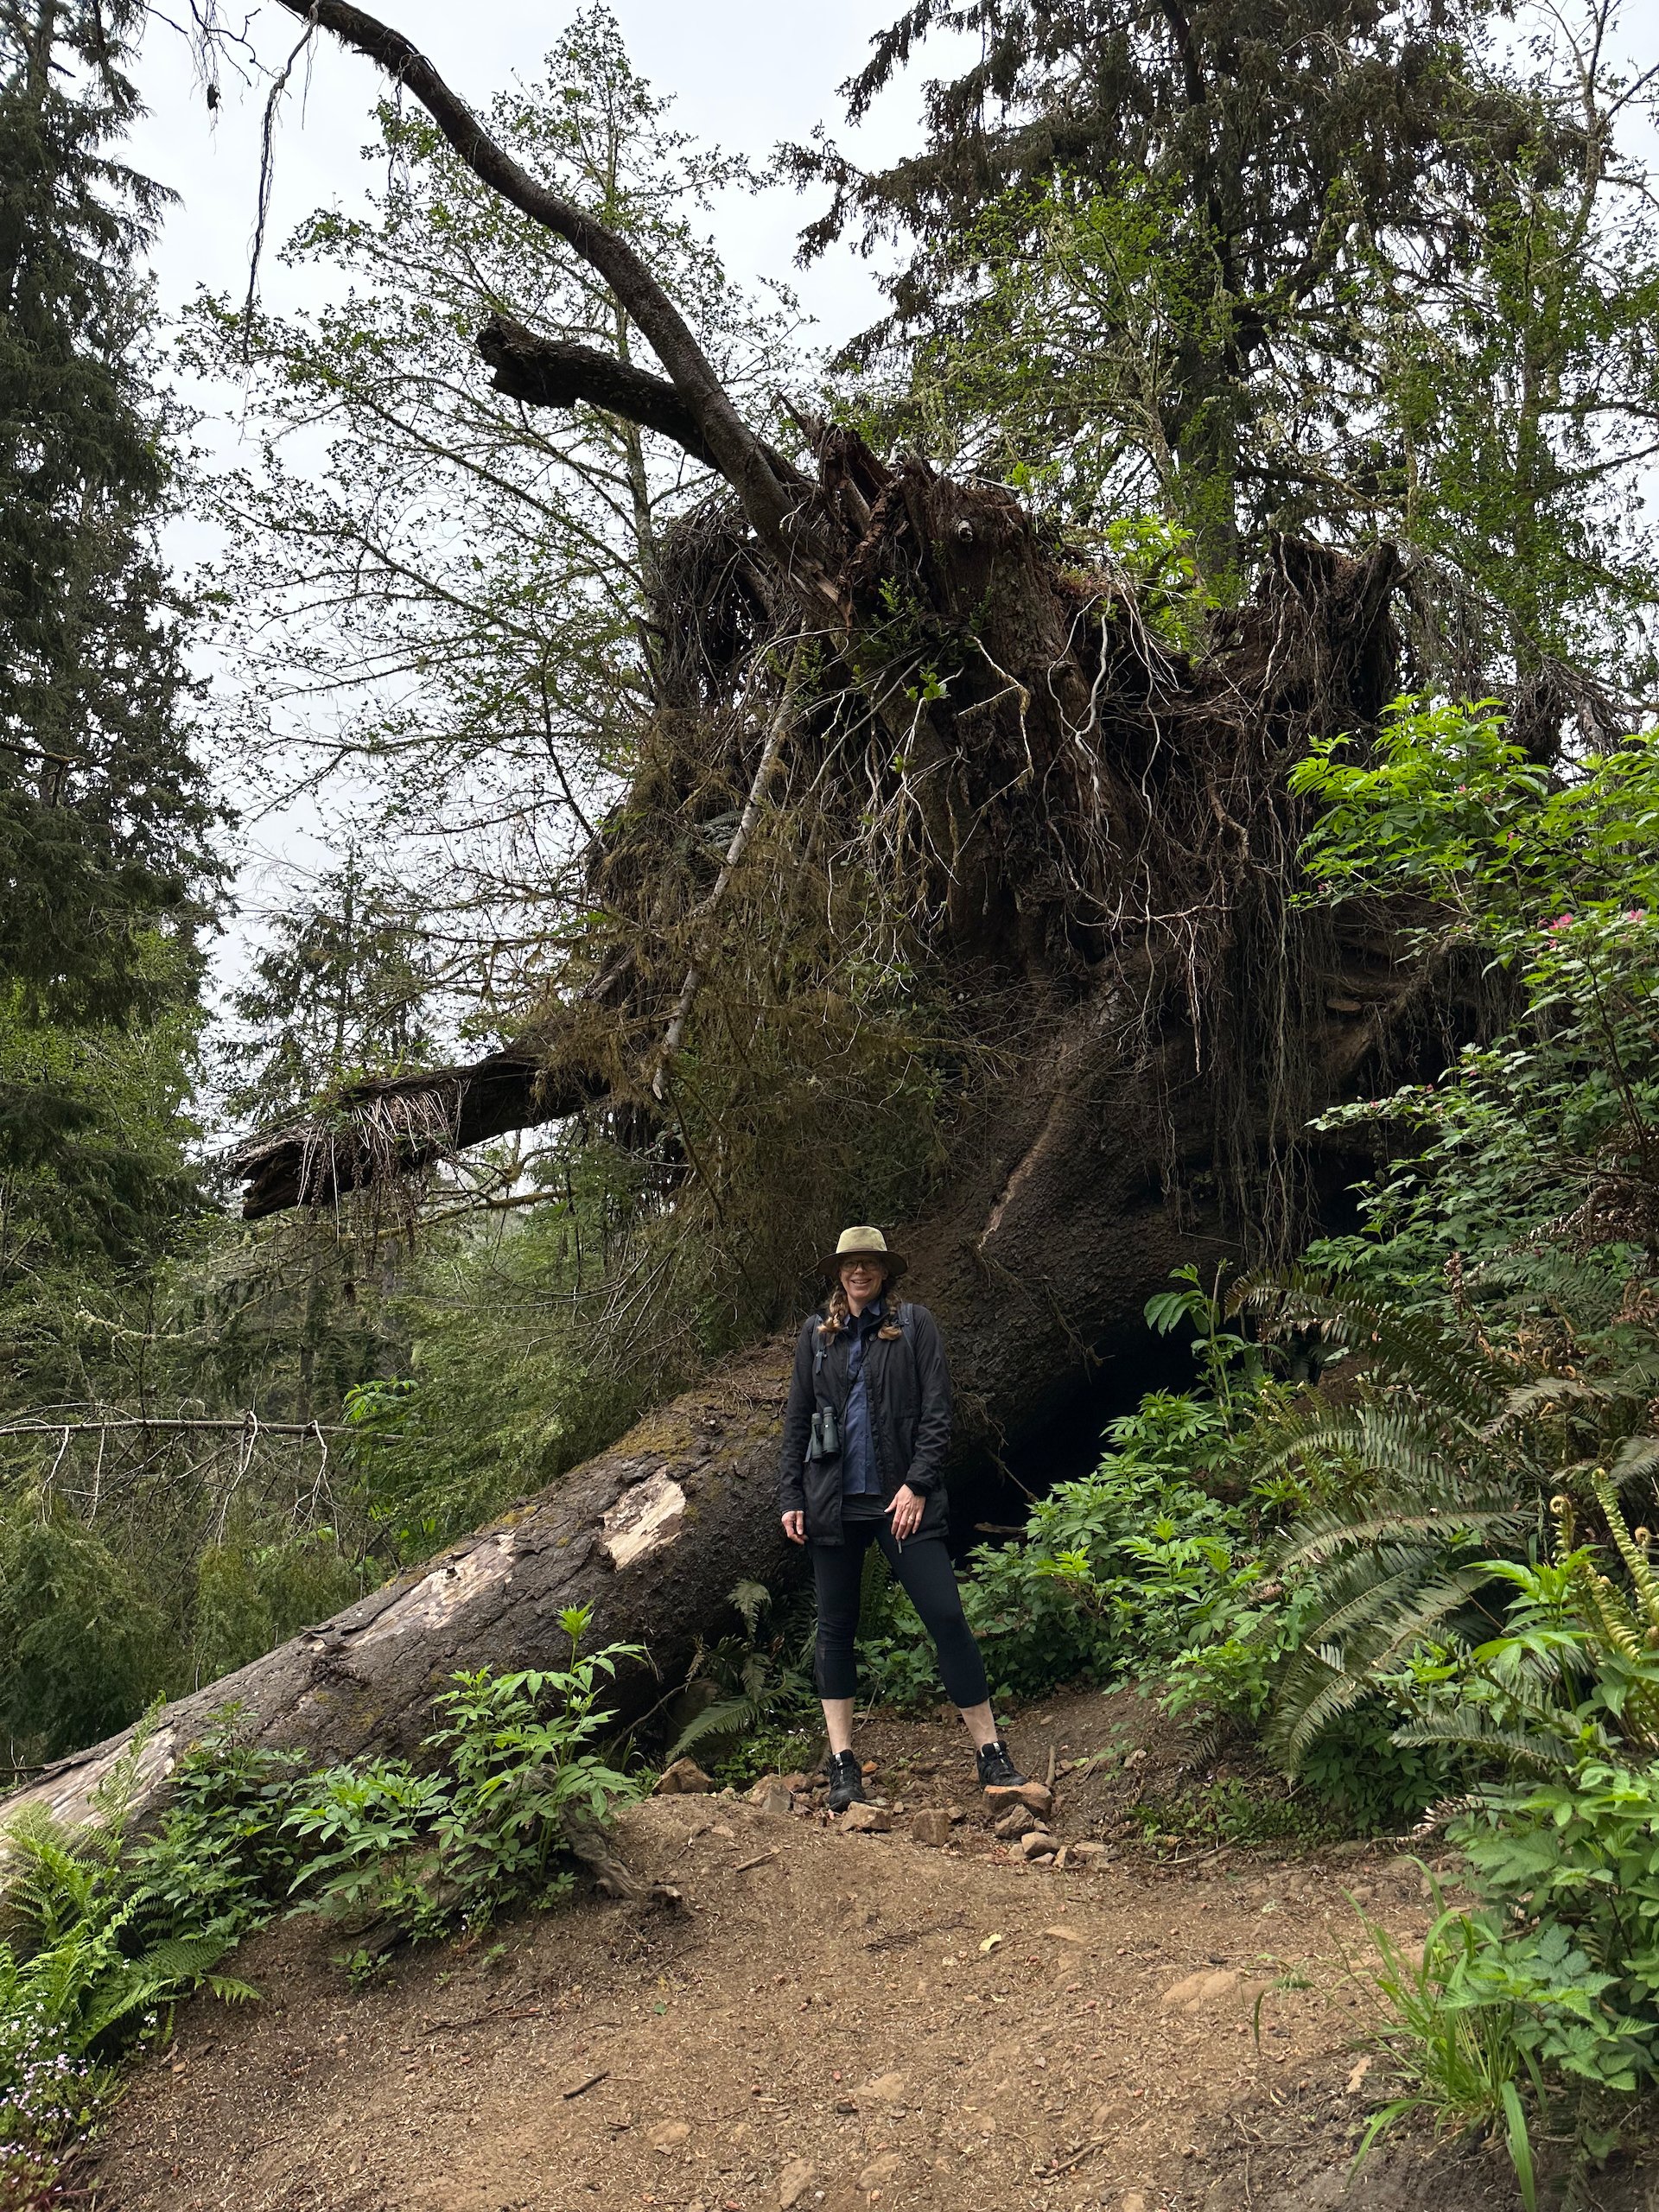  This huge tree had come down in a fairly recent storm, forcing them to re-route the trail around it.  